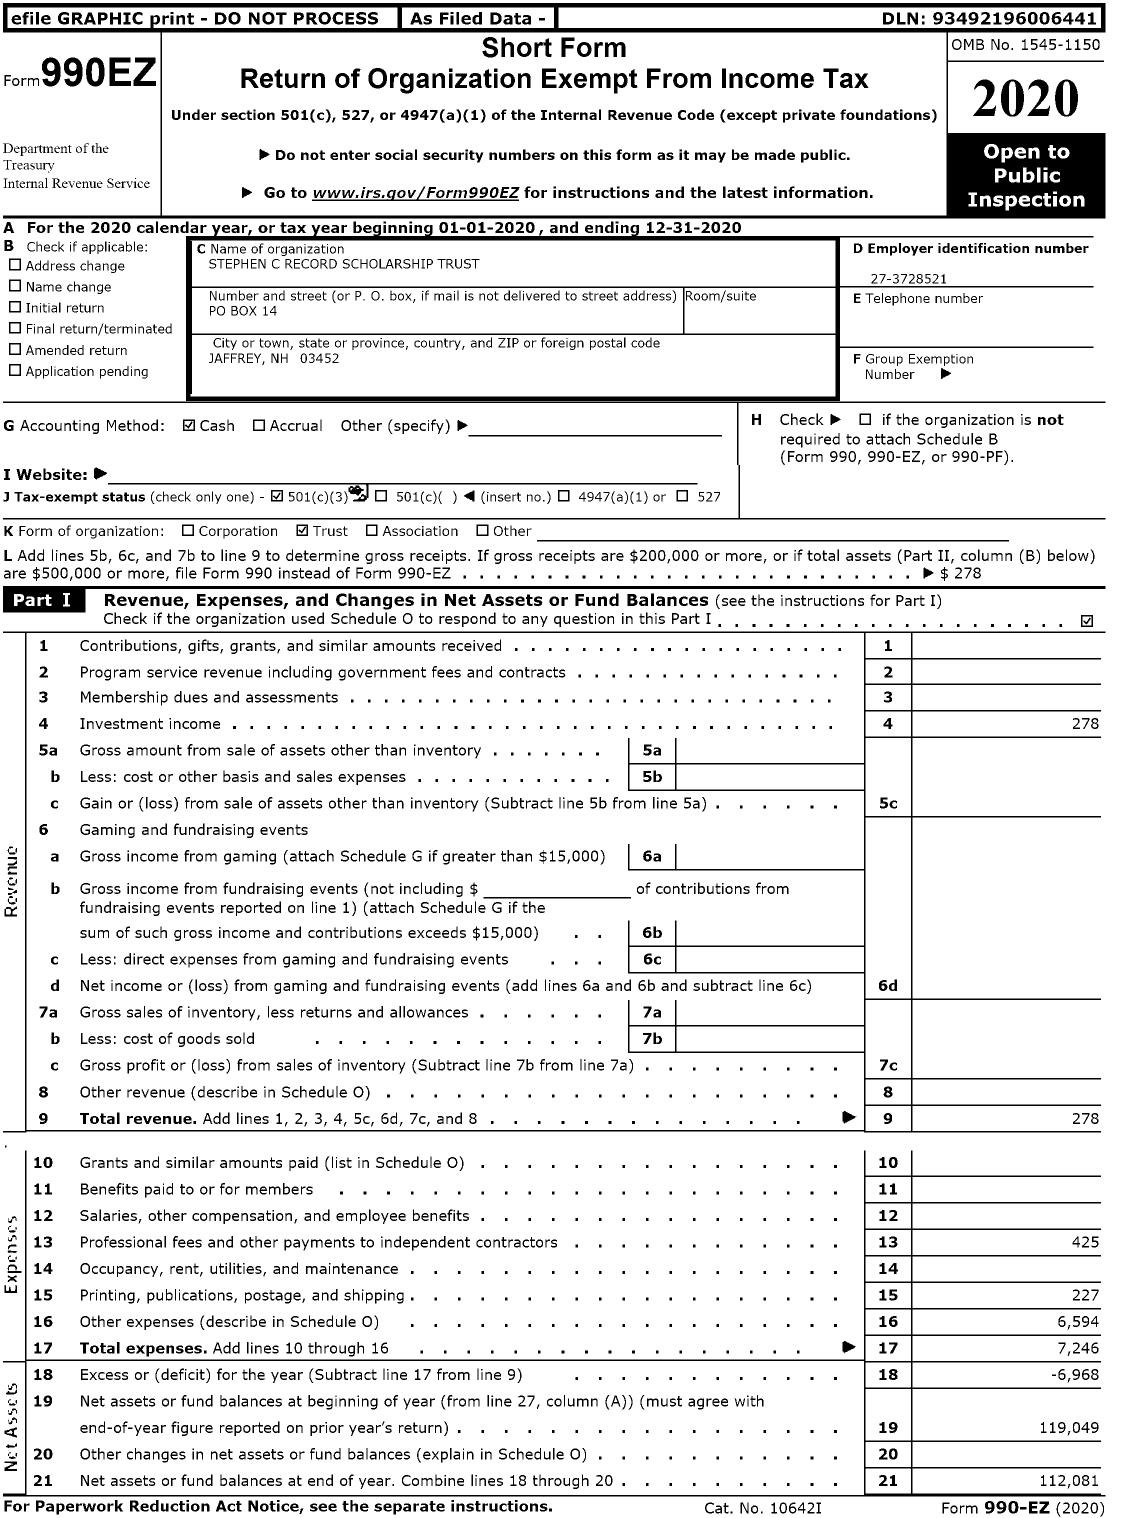 Image of first page of 2020 Form 990EZ for Stephen C Record Scholarship Trust